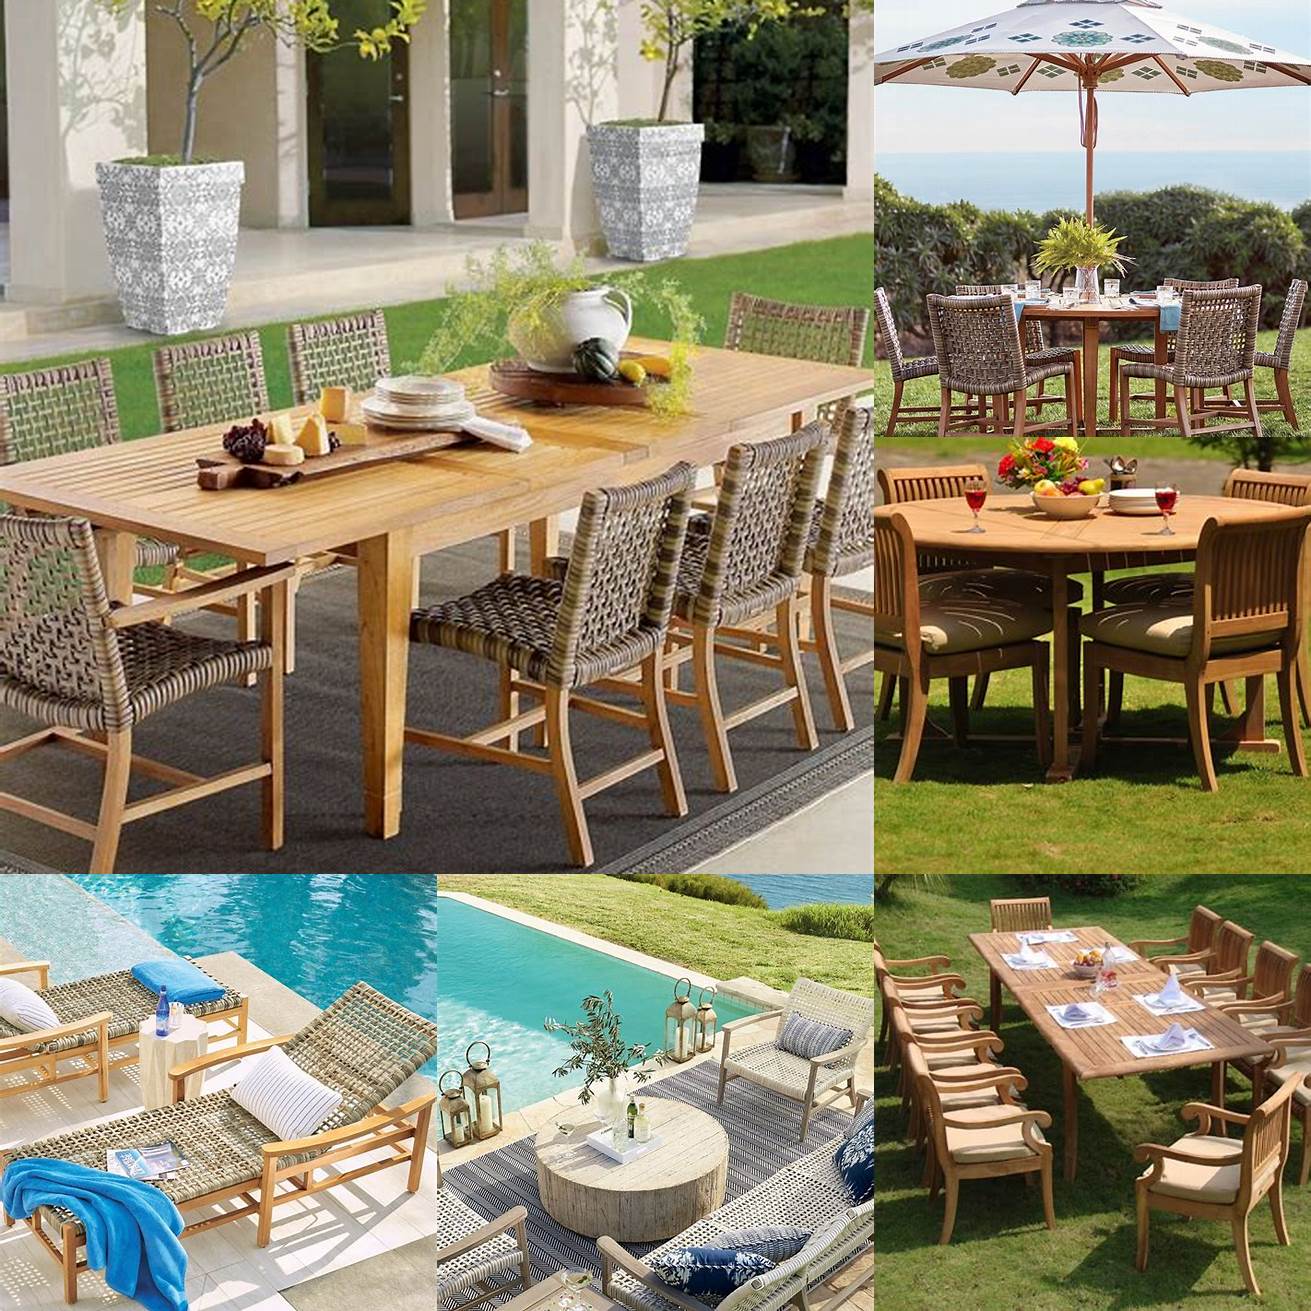 A picture of teak furniture in different climates